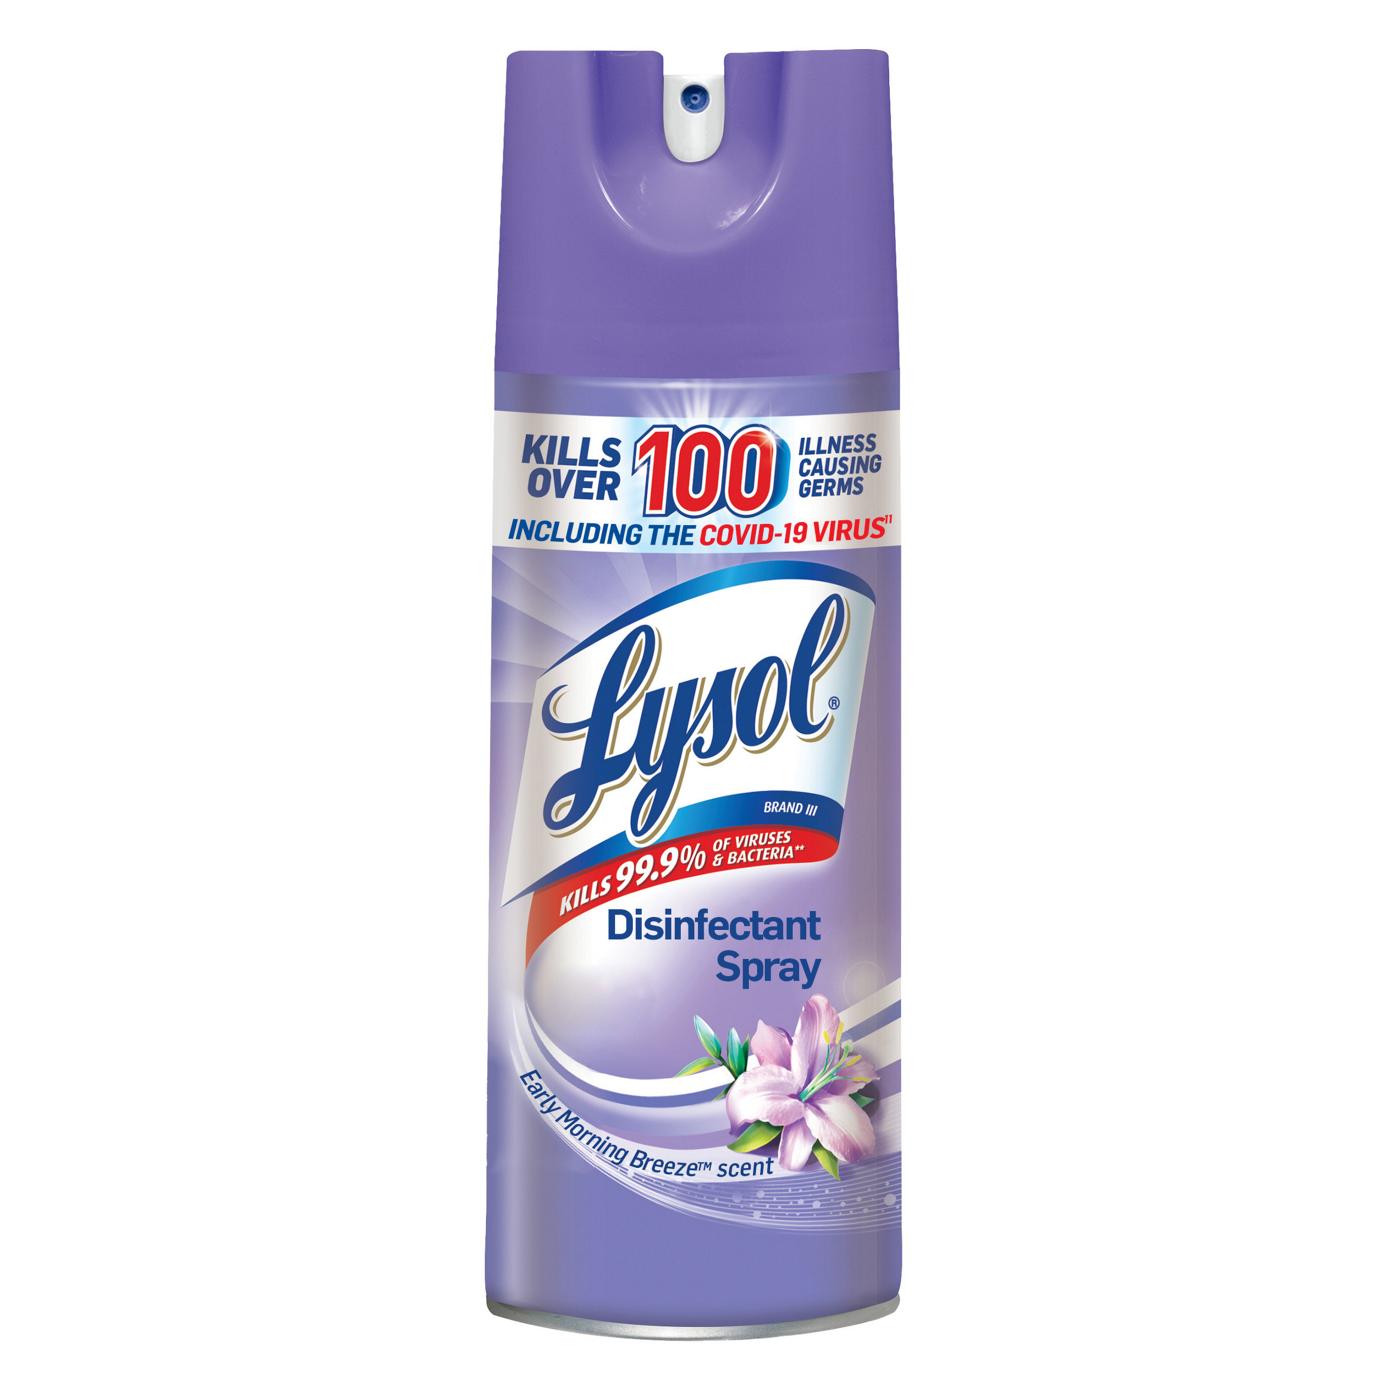 Lysol Early Morning Breeze Scent Disinfectant Spray; image 1 of 6